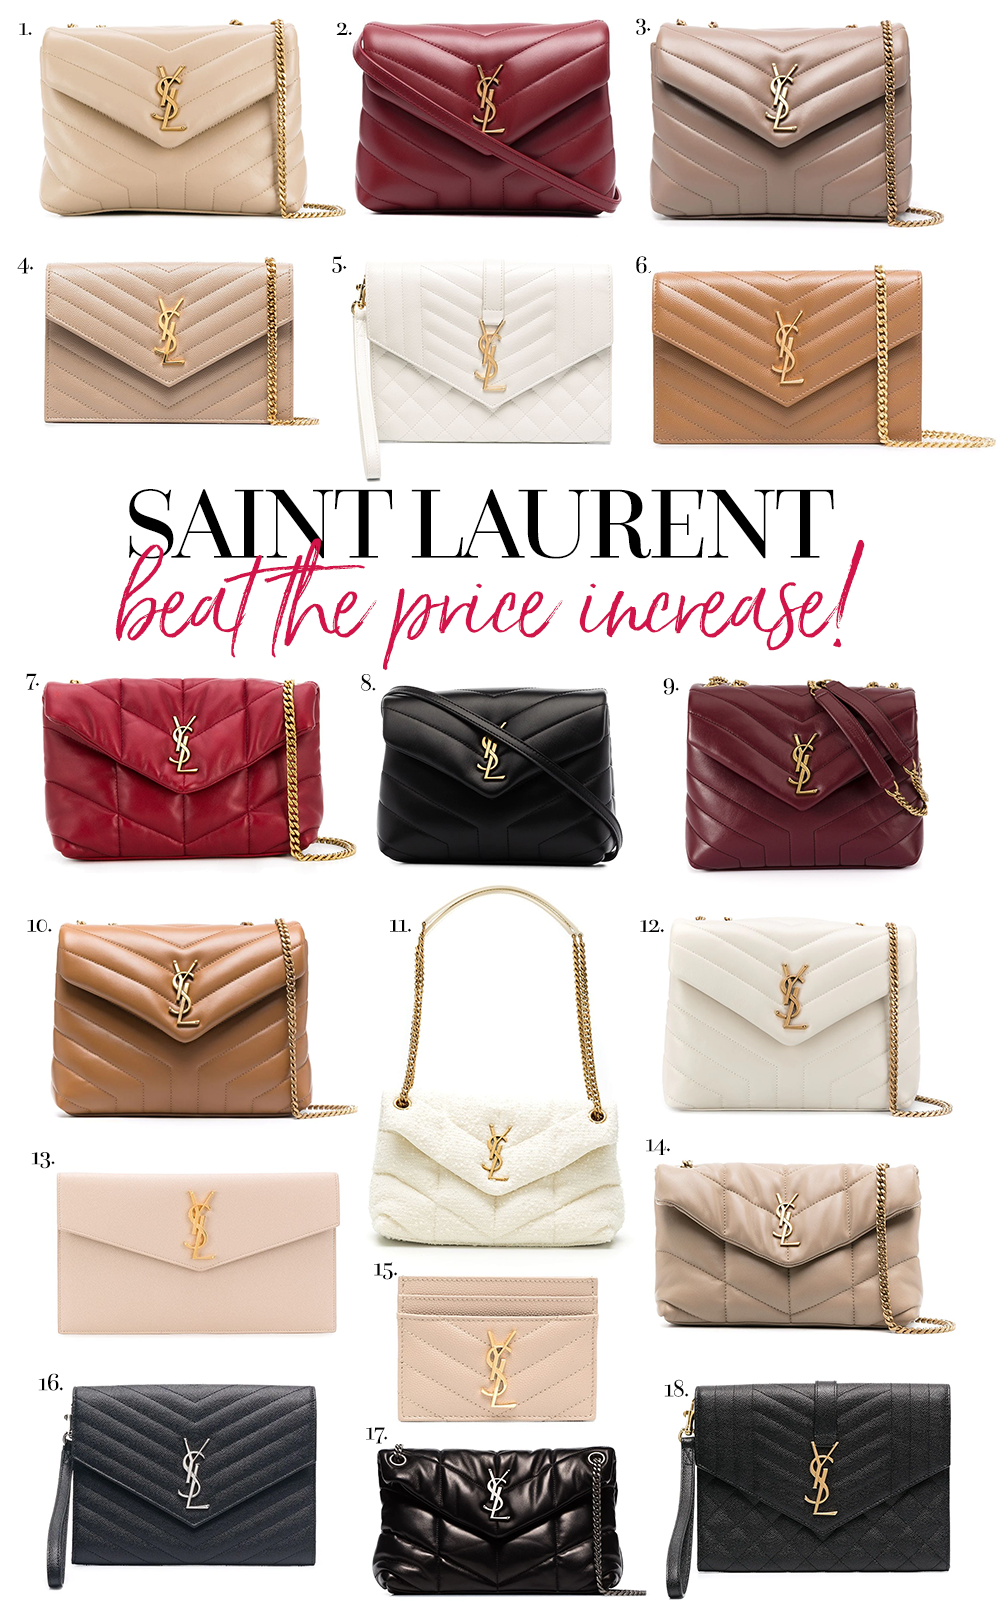 Beat the price increase - Saint Laurent! - Chase Amie